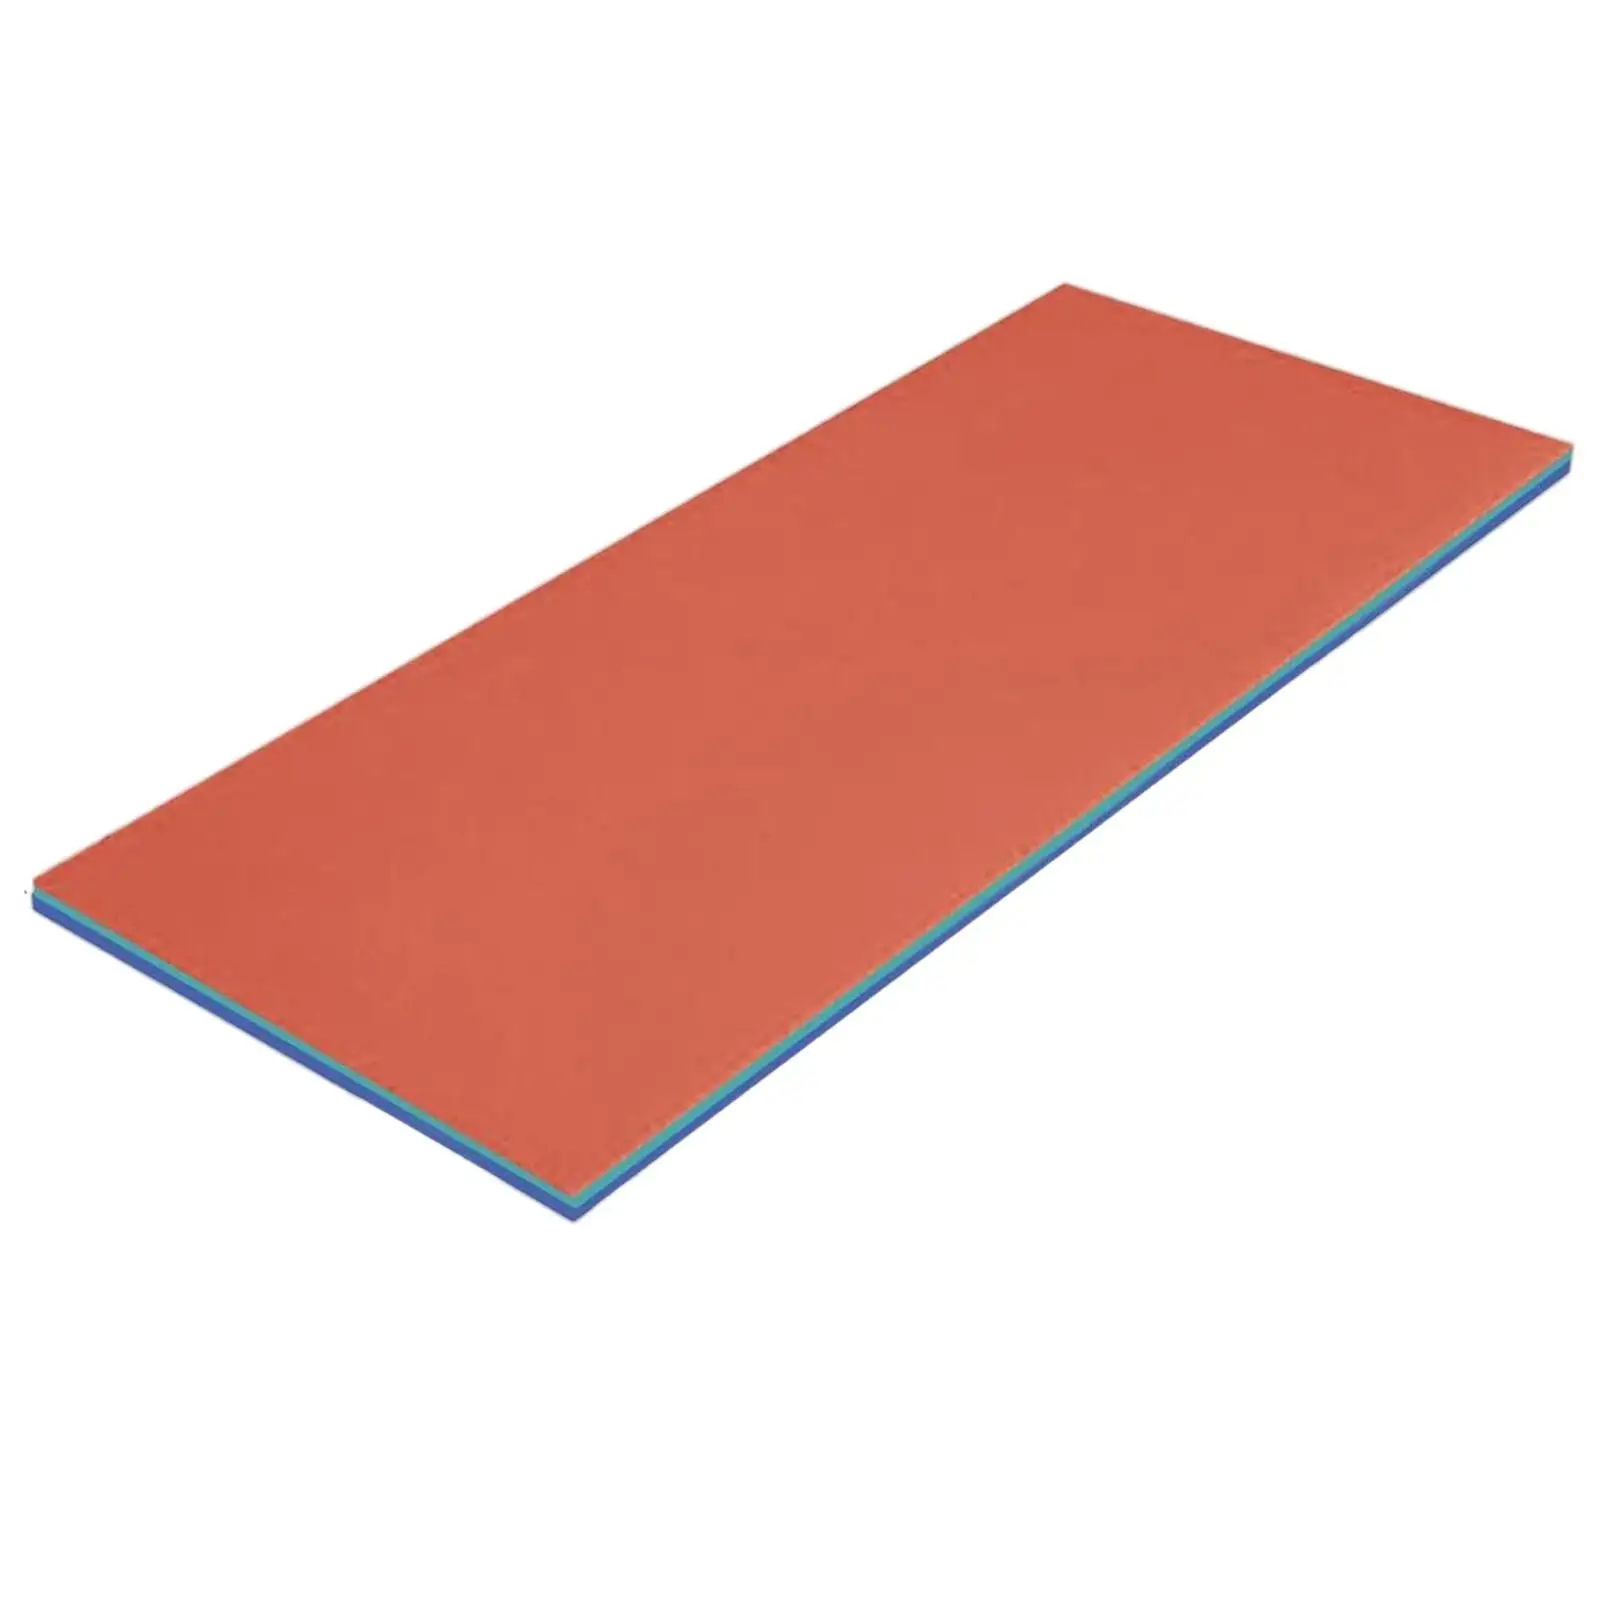 Water Float Mat Comfortable Float Raft High Density Play Float Mat Bed Floats Mattress for Lake River Boating Beach Outdoor